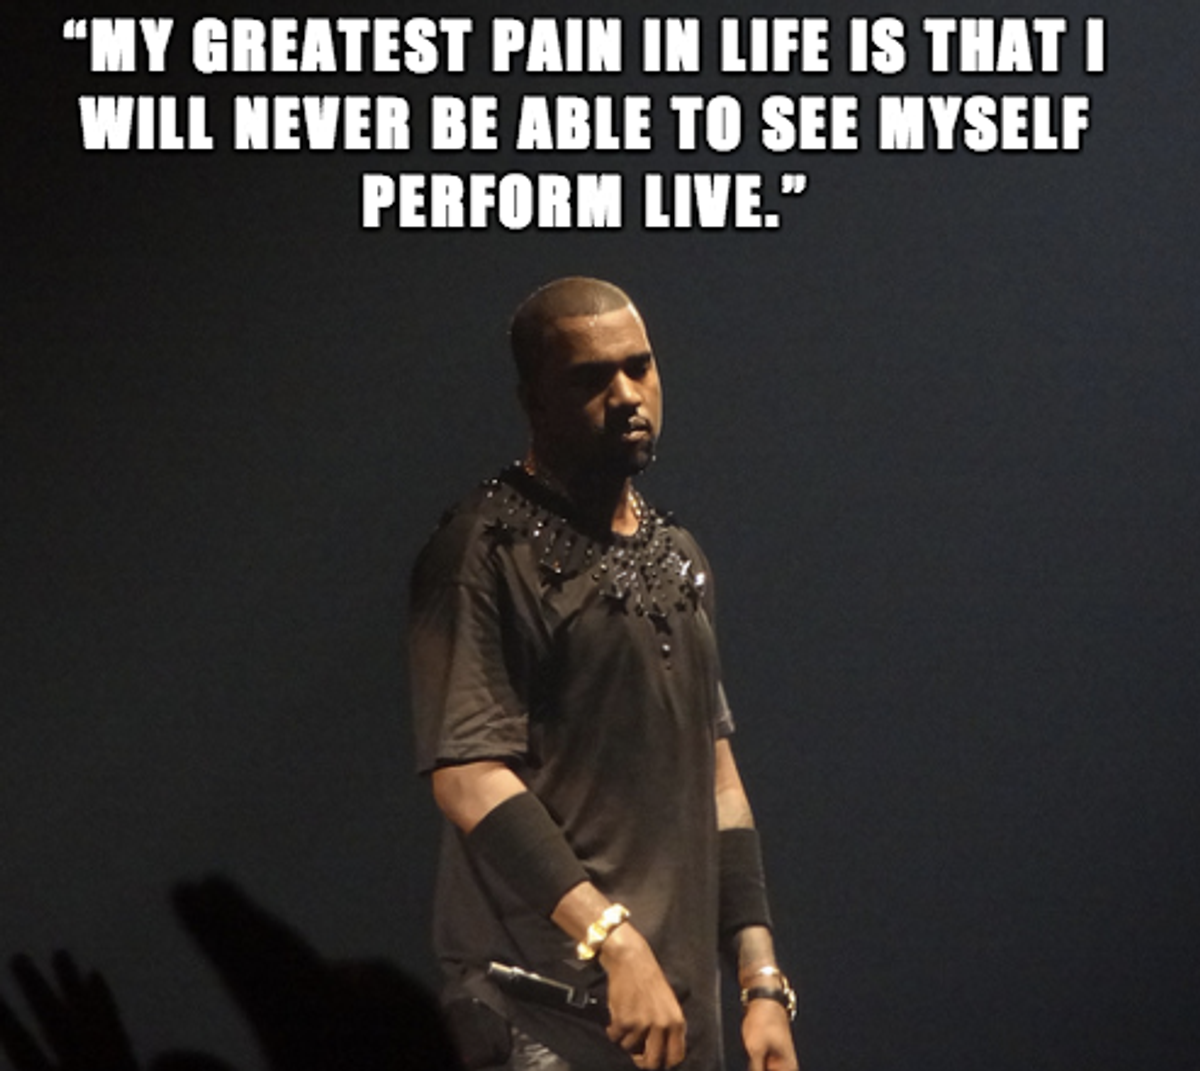 We Should All Love Ourselves As Much As Kanye Loves Kanye